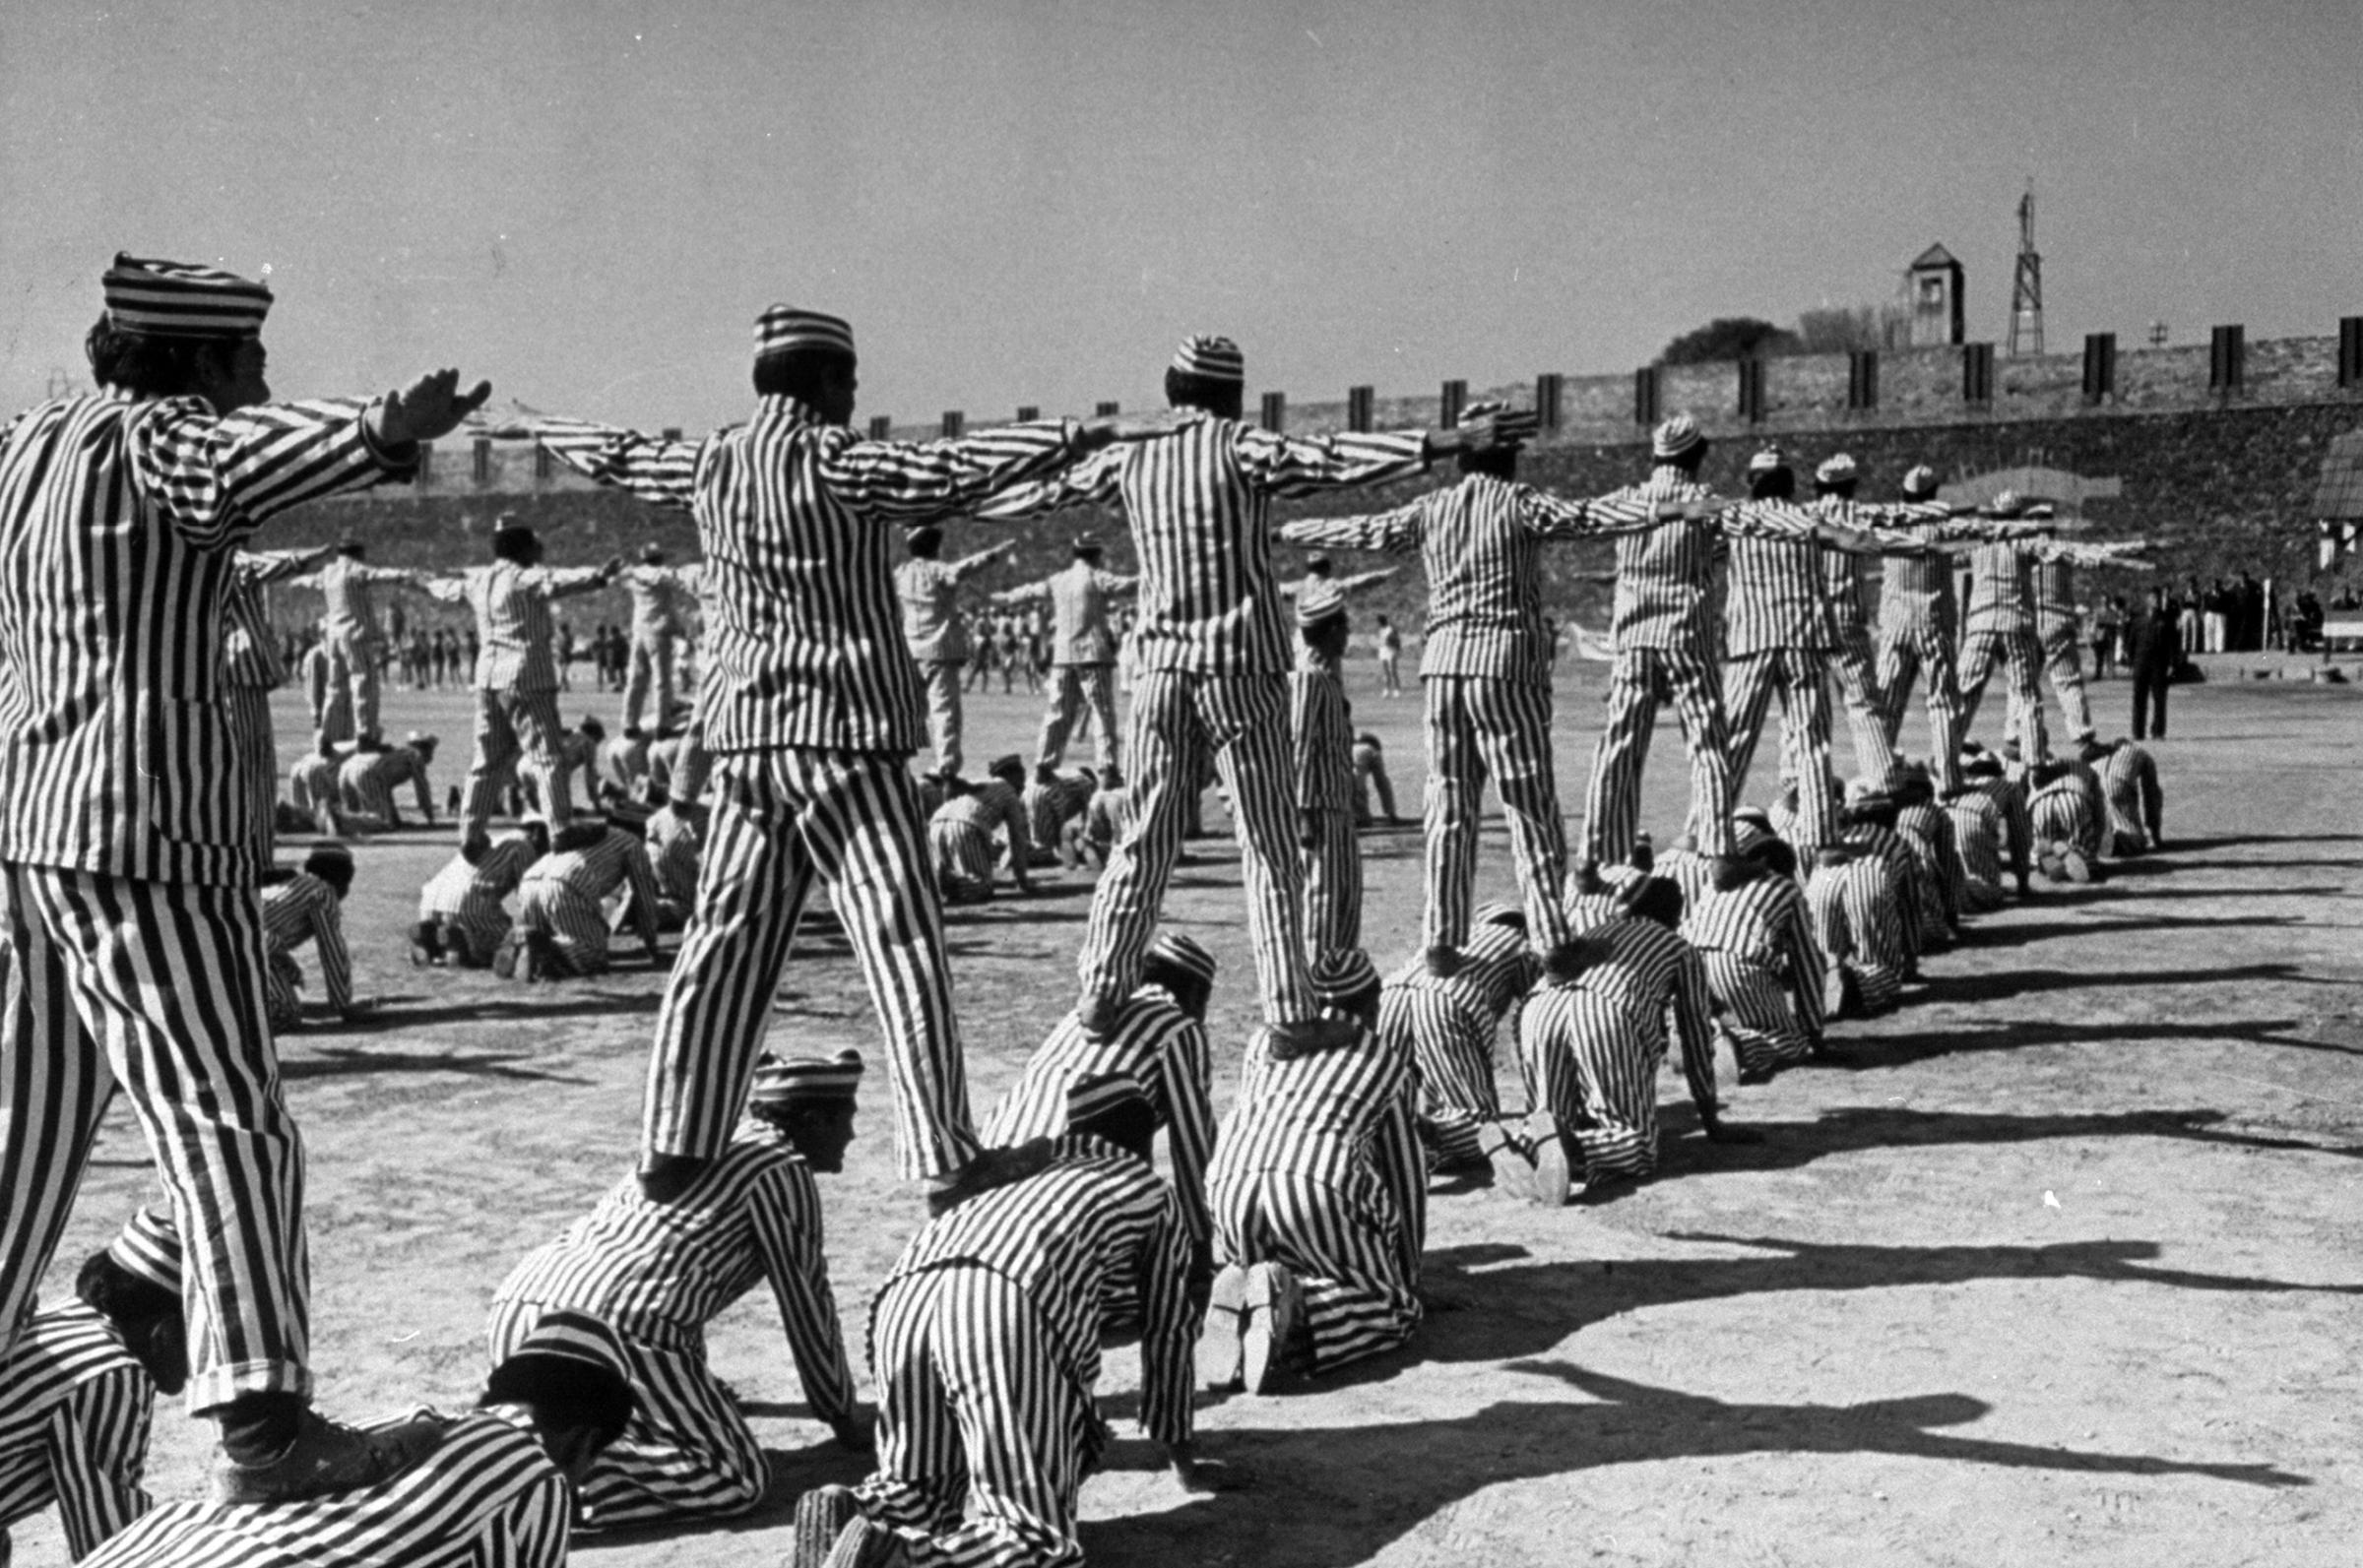 Mass calisthenics use up 4 1/2 hours in the daily routine of most male prisoners. On this same big field they also play softball, volleyball and basketball.